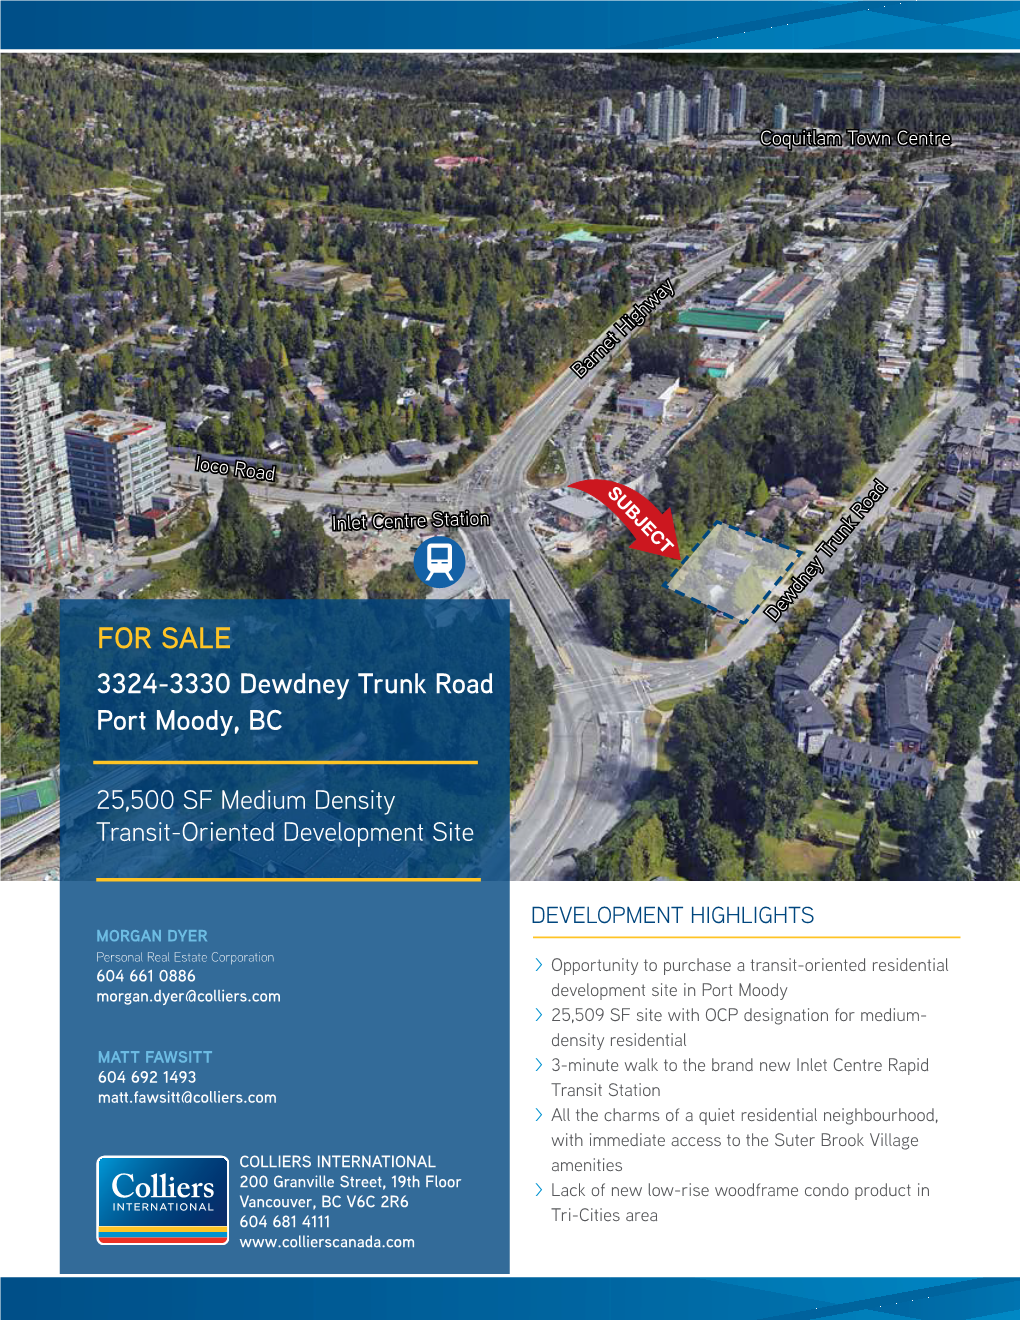 FOR SALE 3324 Dewdney Trunk Road, Port Moody, BC